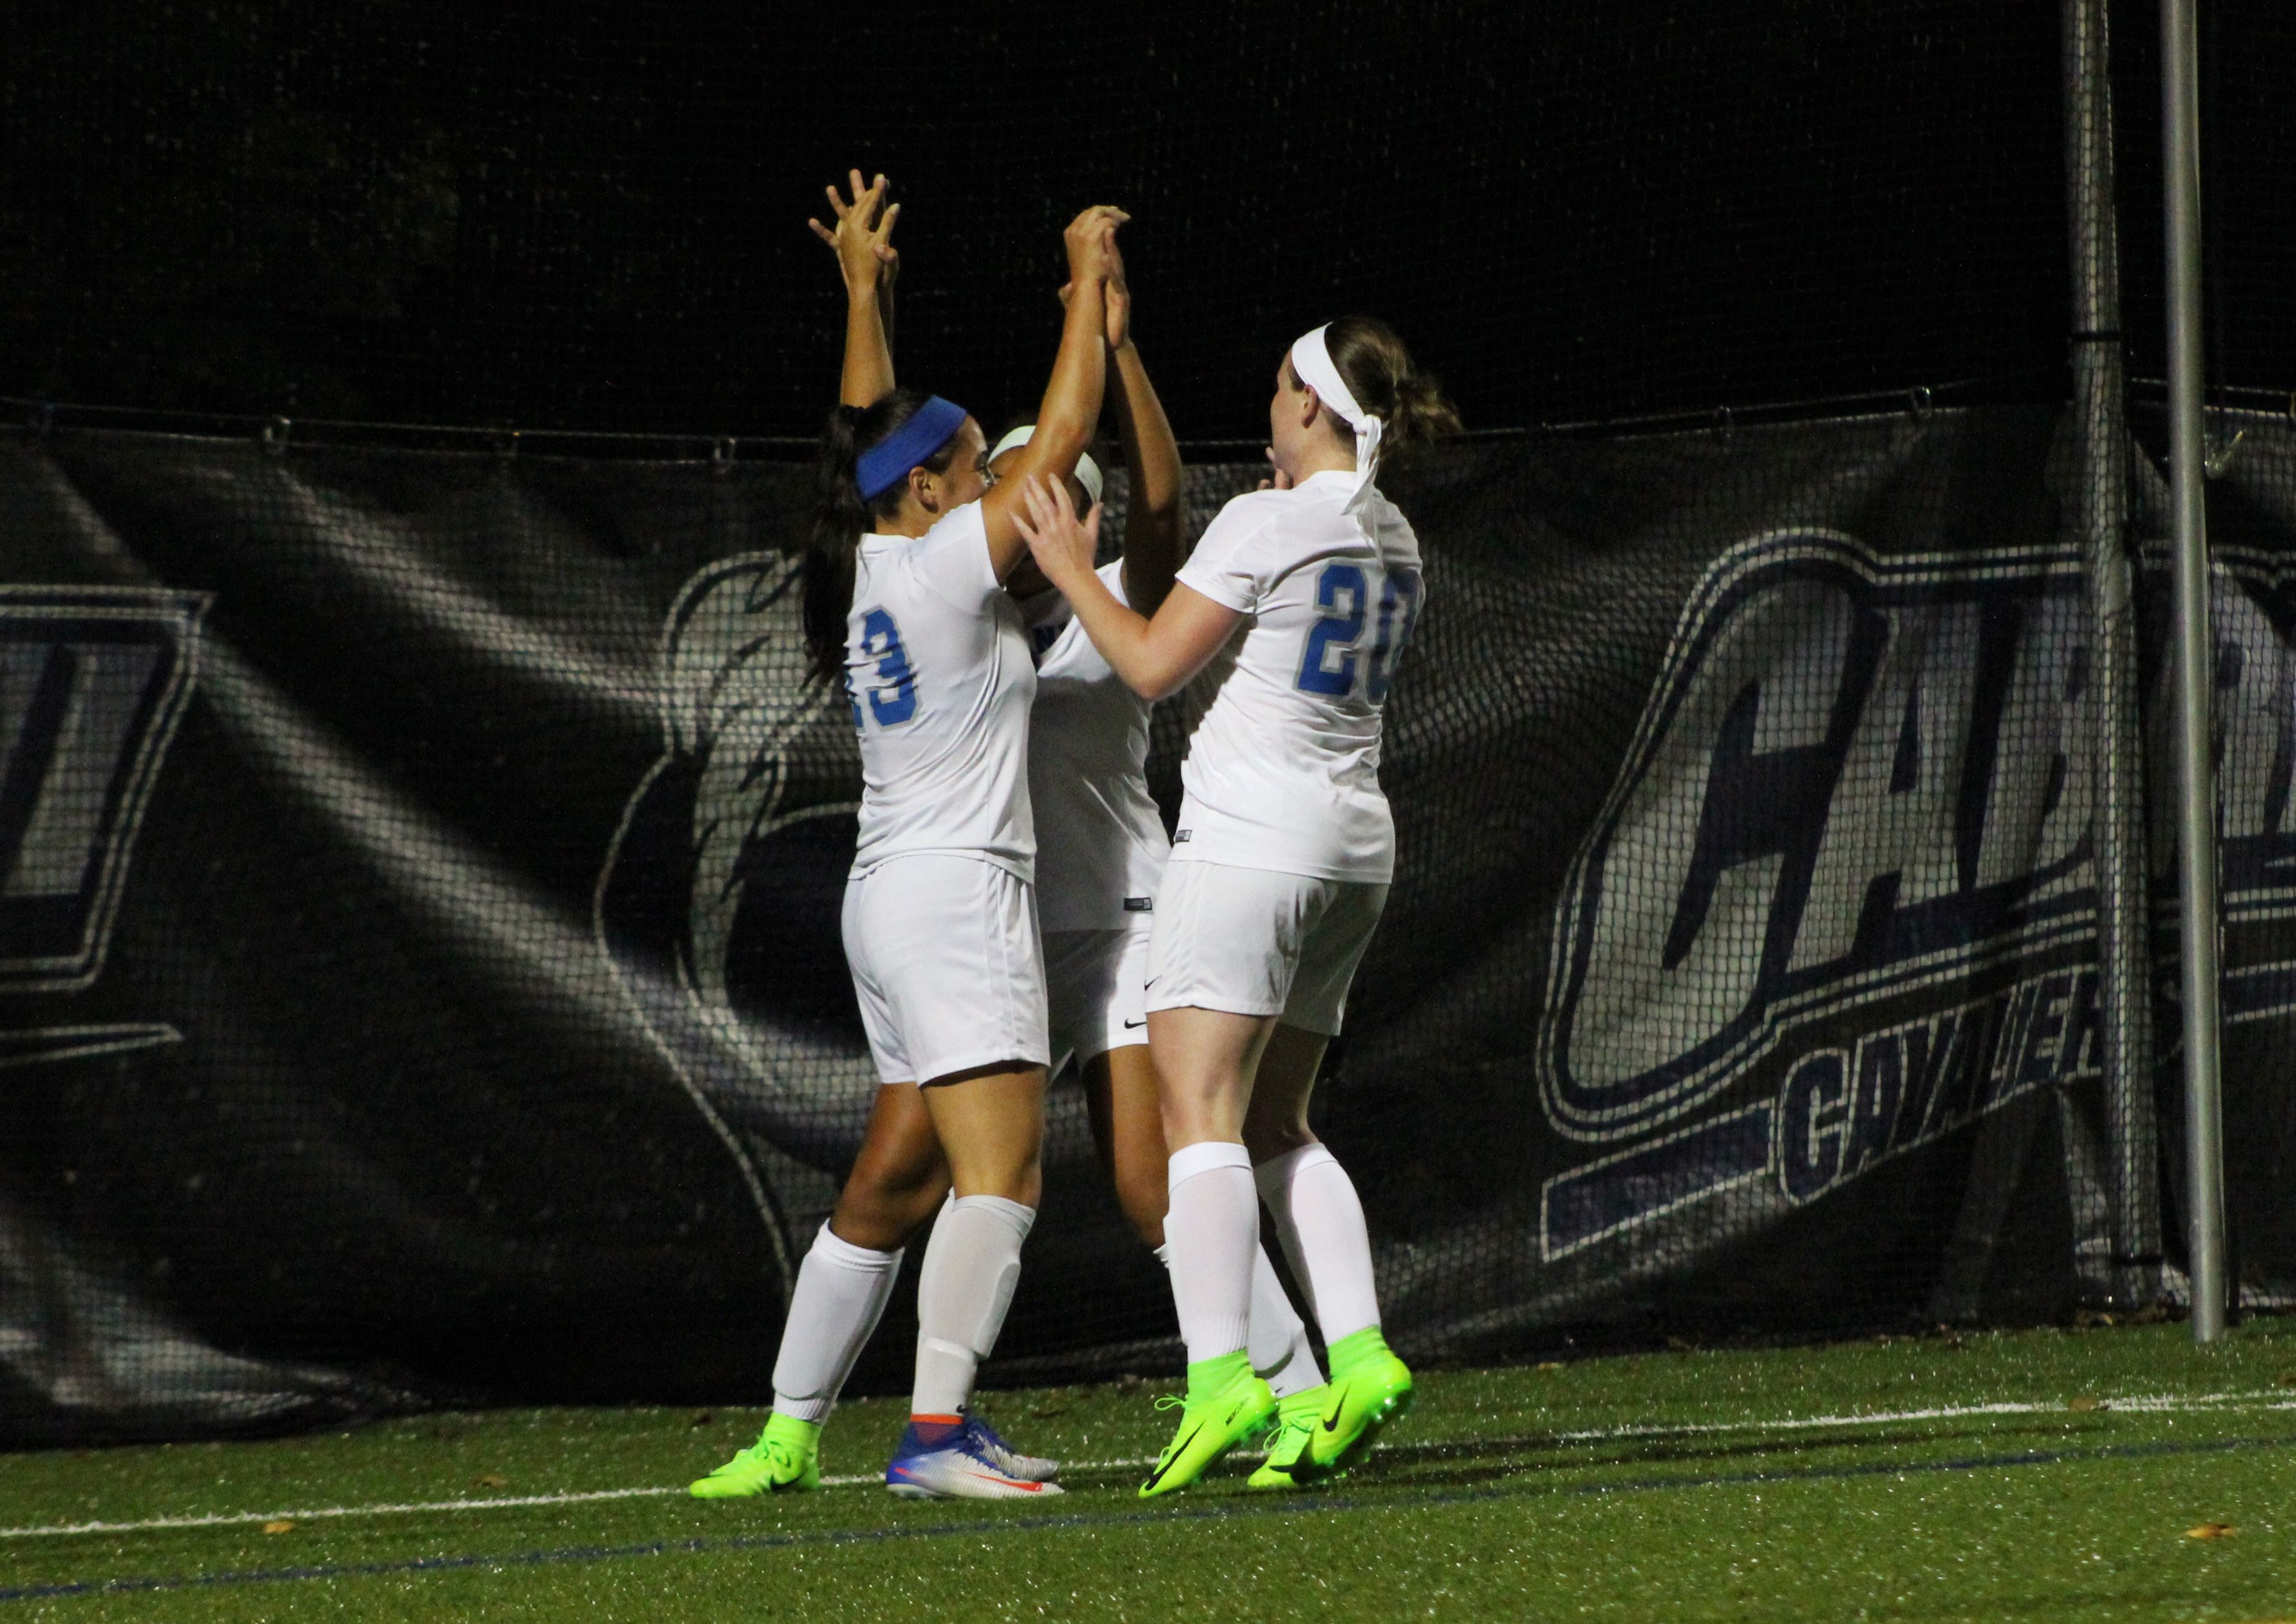 Cavaliers celebrate after scoring a goal. Photo by Michelle Guerin